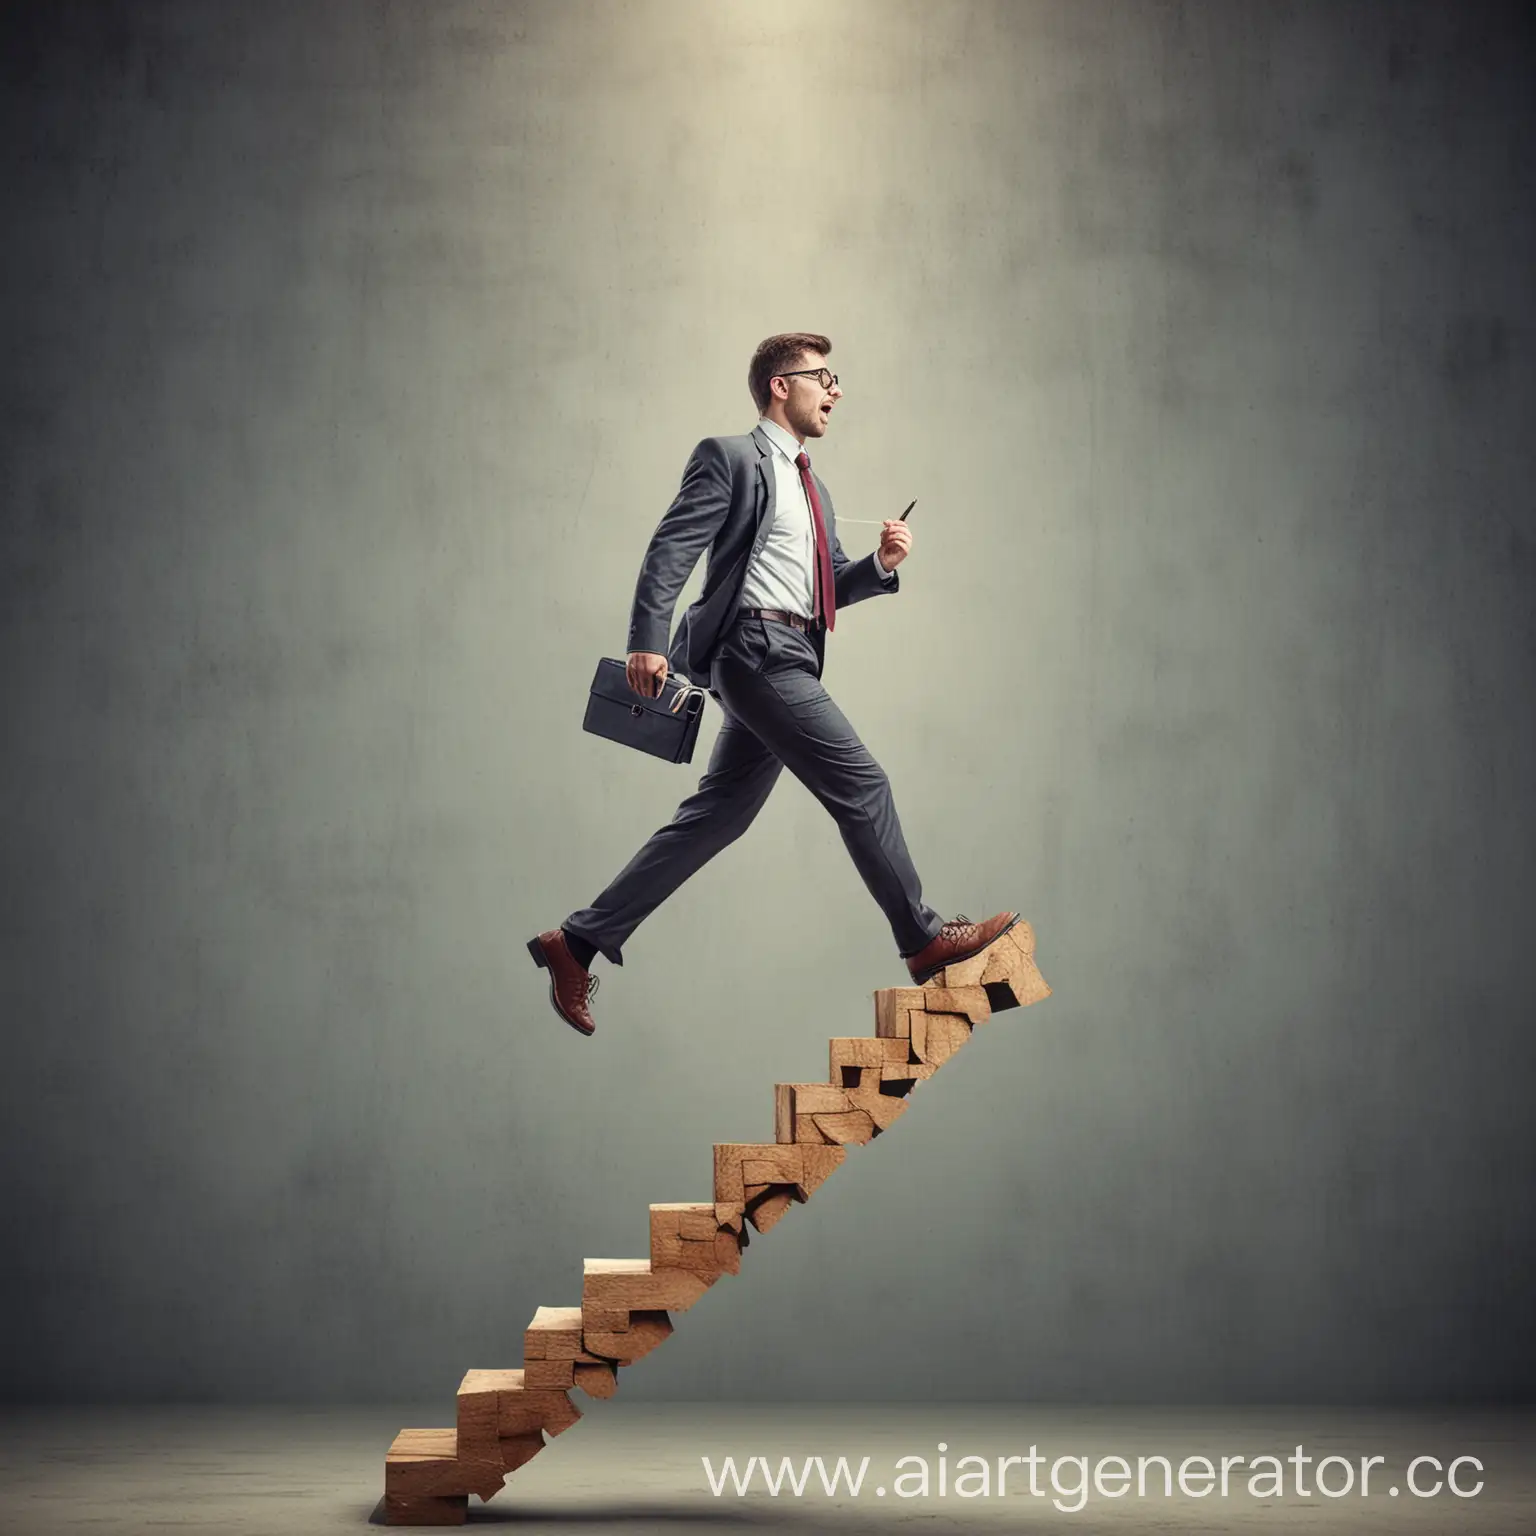 Accountant-Climbing-Career-Ladder-Symbol-of-Growth-and-Aspiration